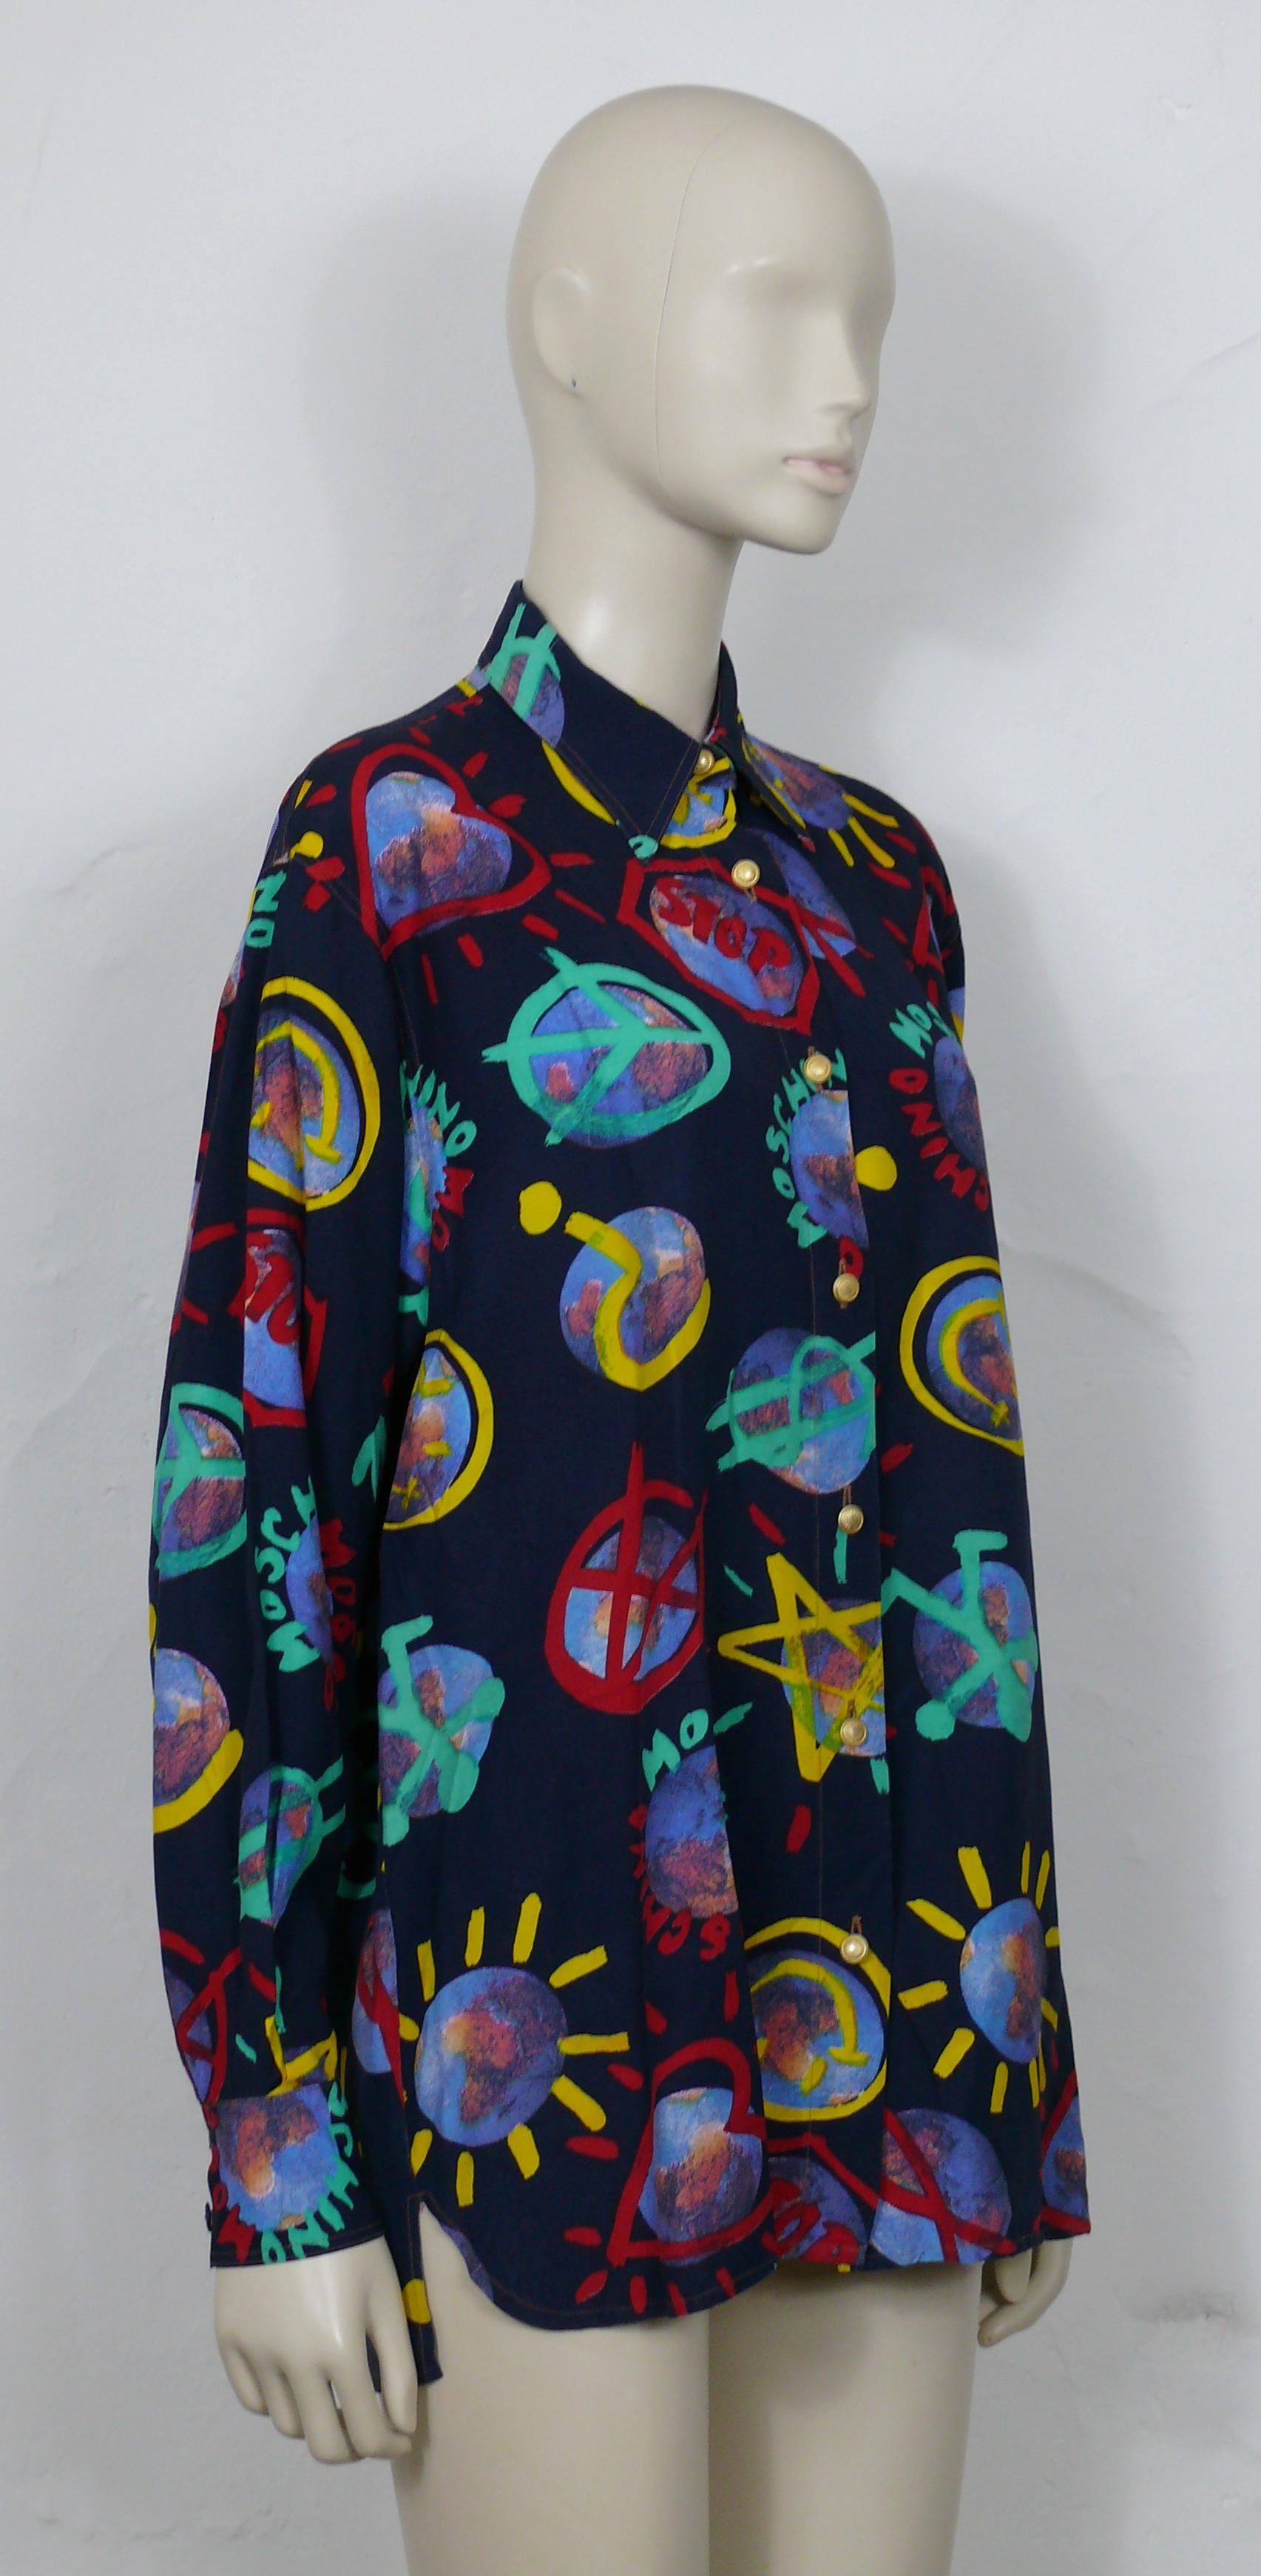 MOSCHINO vintage shirt featuring an opulent multicolor print of Earths and various signs (peace, smiley, anarchy, dollar...) on a navy blue background.

Long sleeves.
Button down closure.
Cuff buttoning.

Label reads MOSCHINO JEANS.
Made in